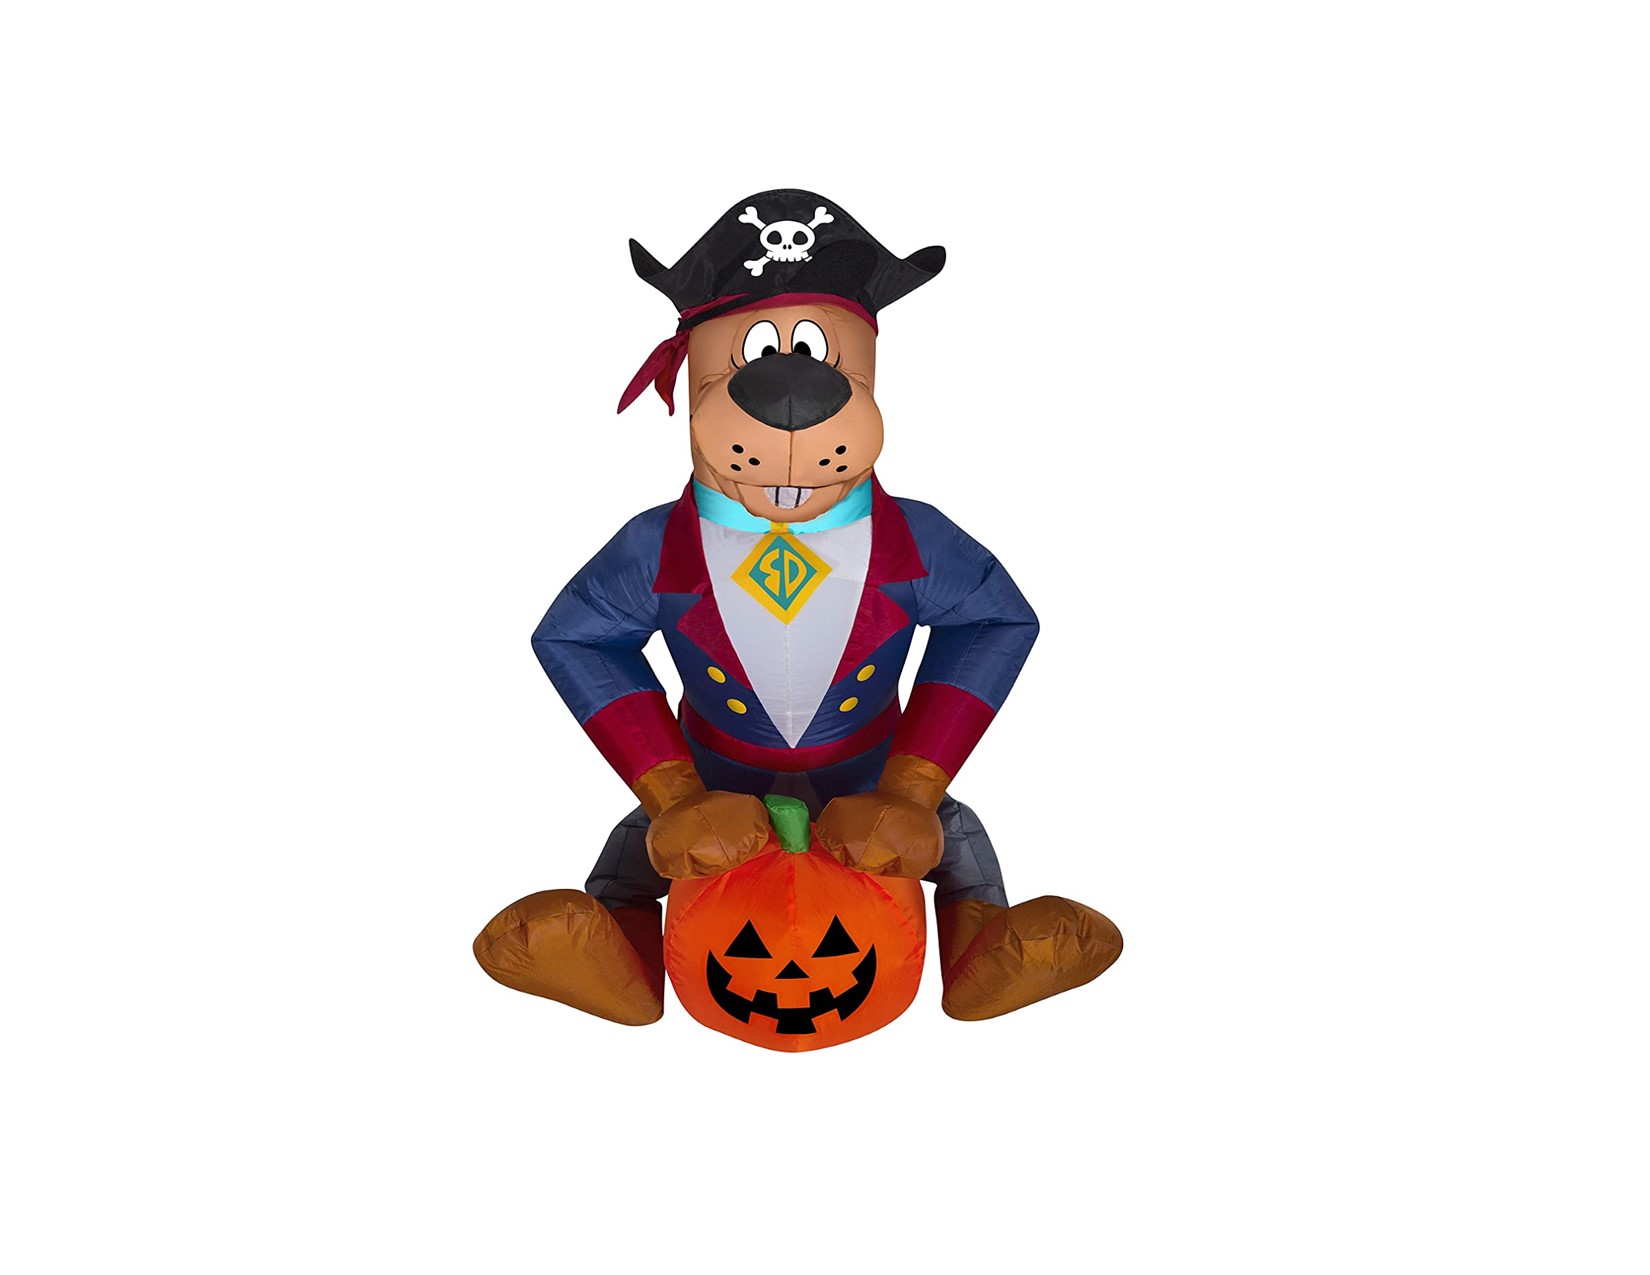 Scooby Doo dog dressed as pirate sitting on a pumpkin